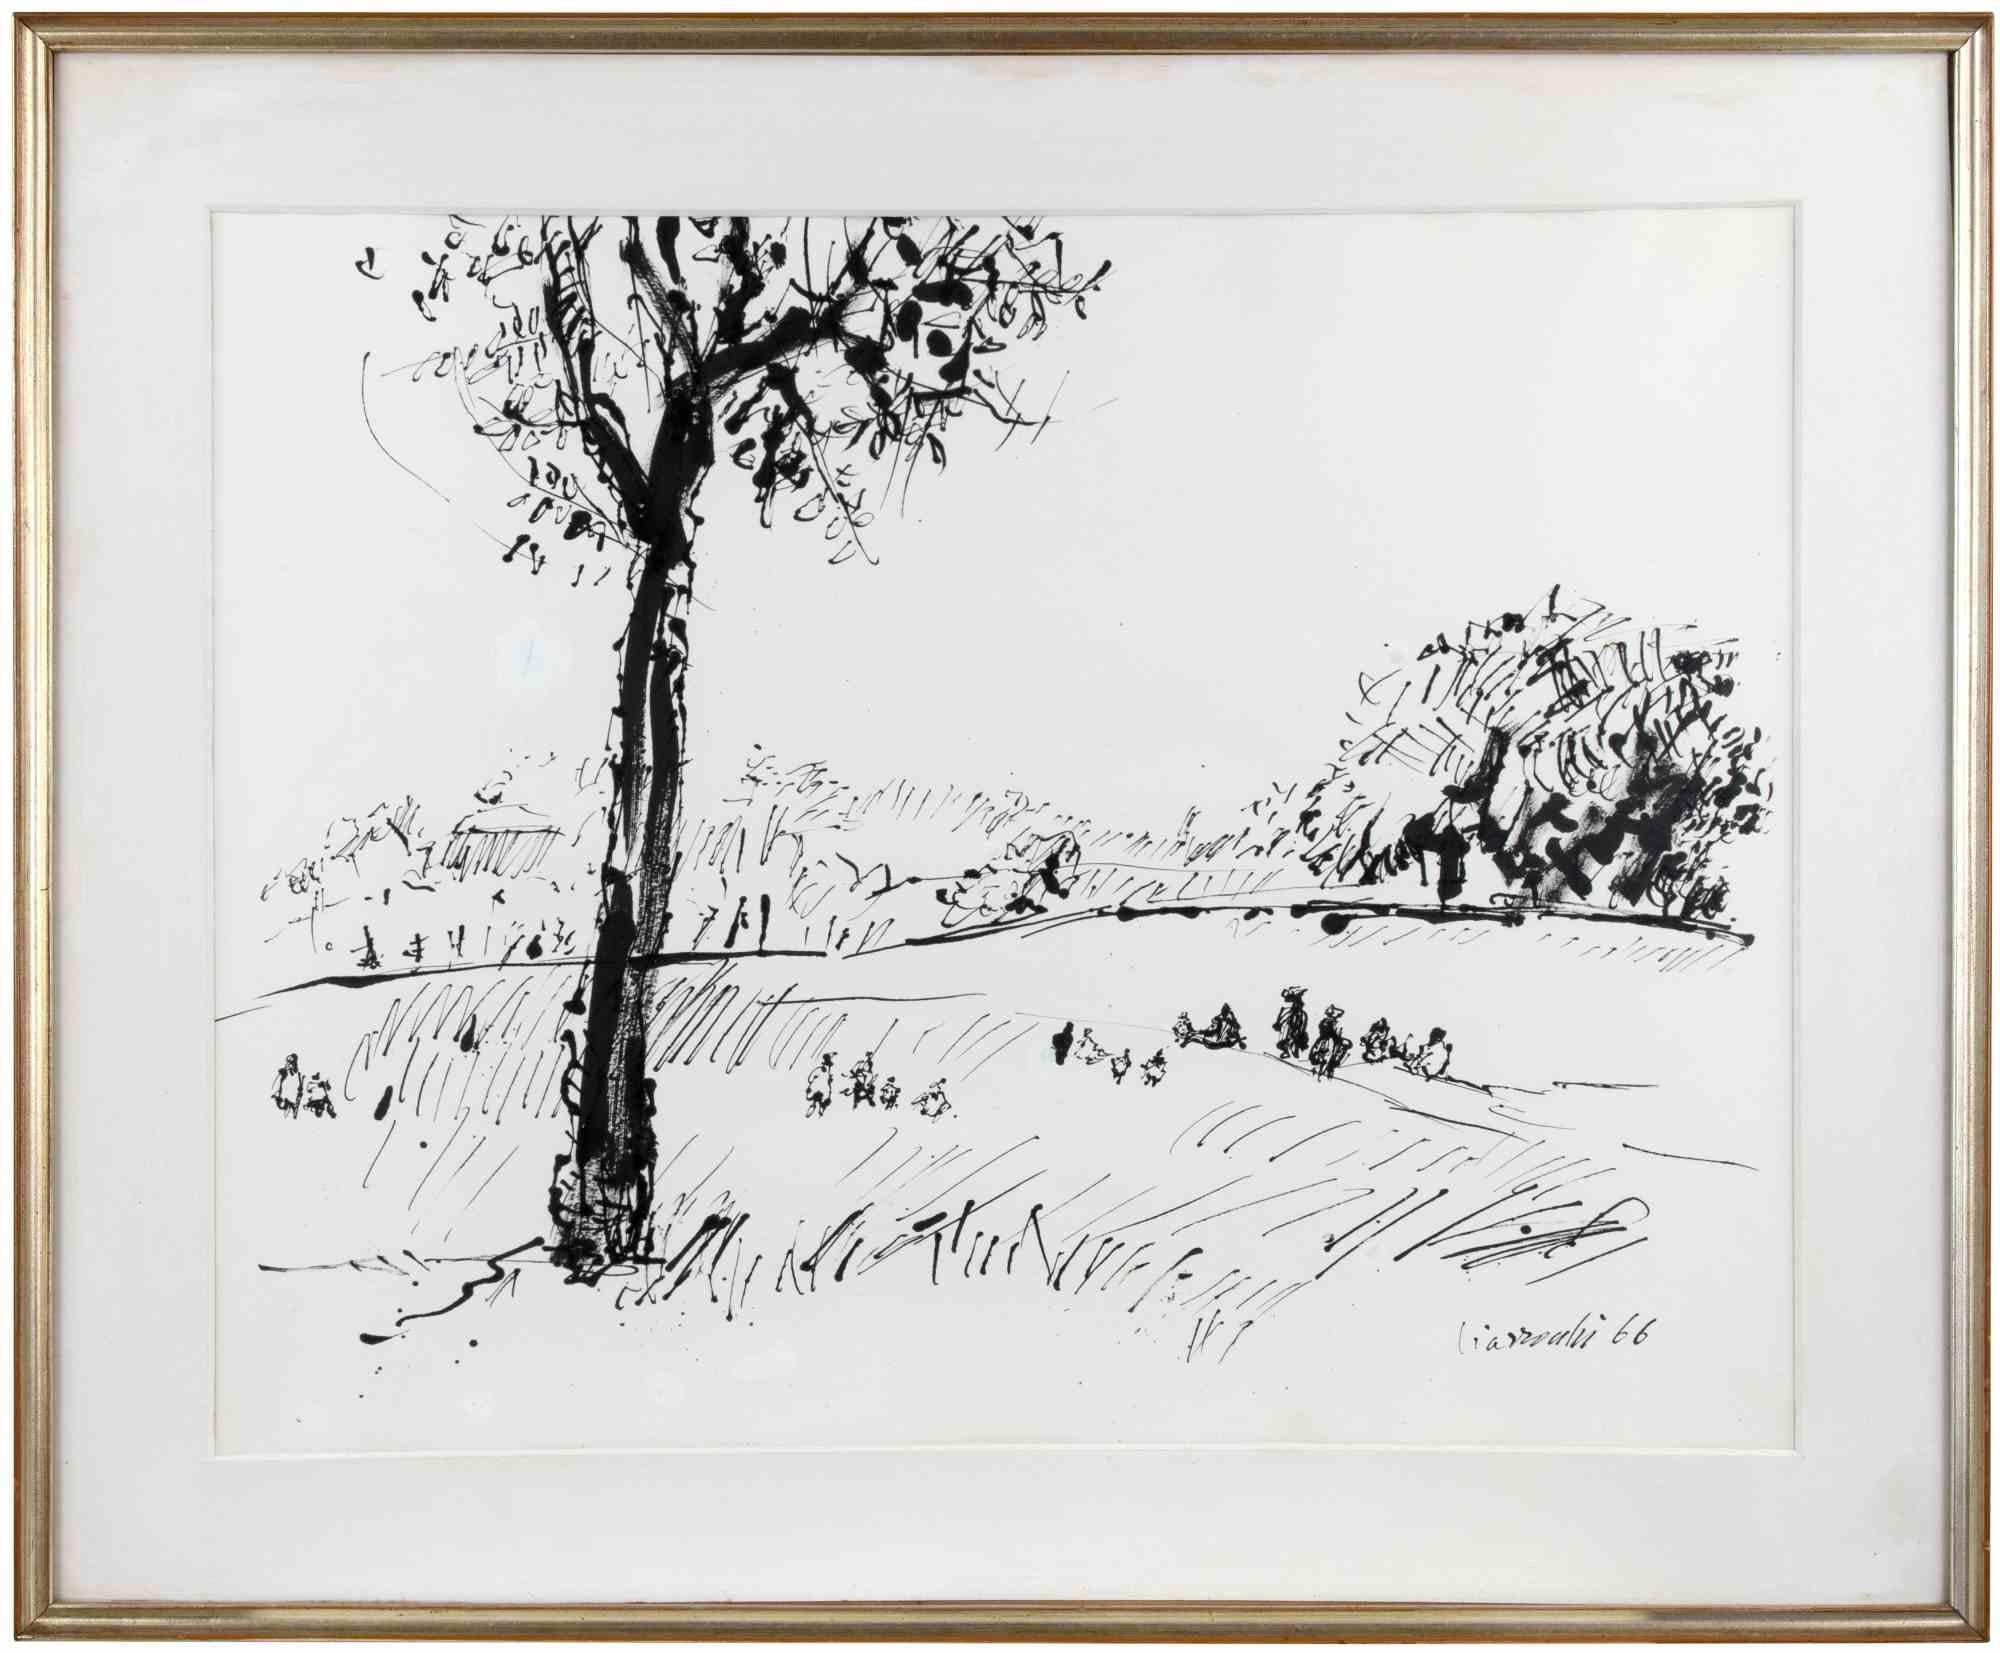 Landscape is a modern artwork realized by Arnoldo Ciarrocchi in 1966.

China ink Drawing on paper.

Hand signed and dated on the lower margin.

Includes frame